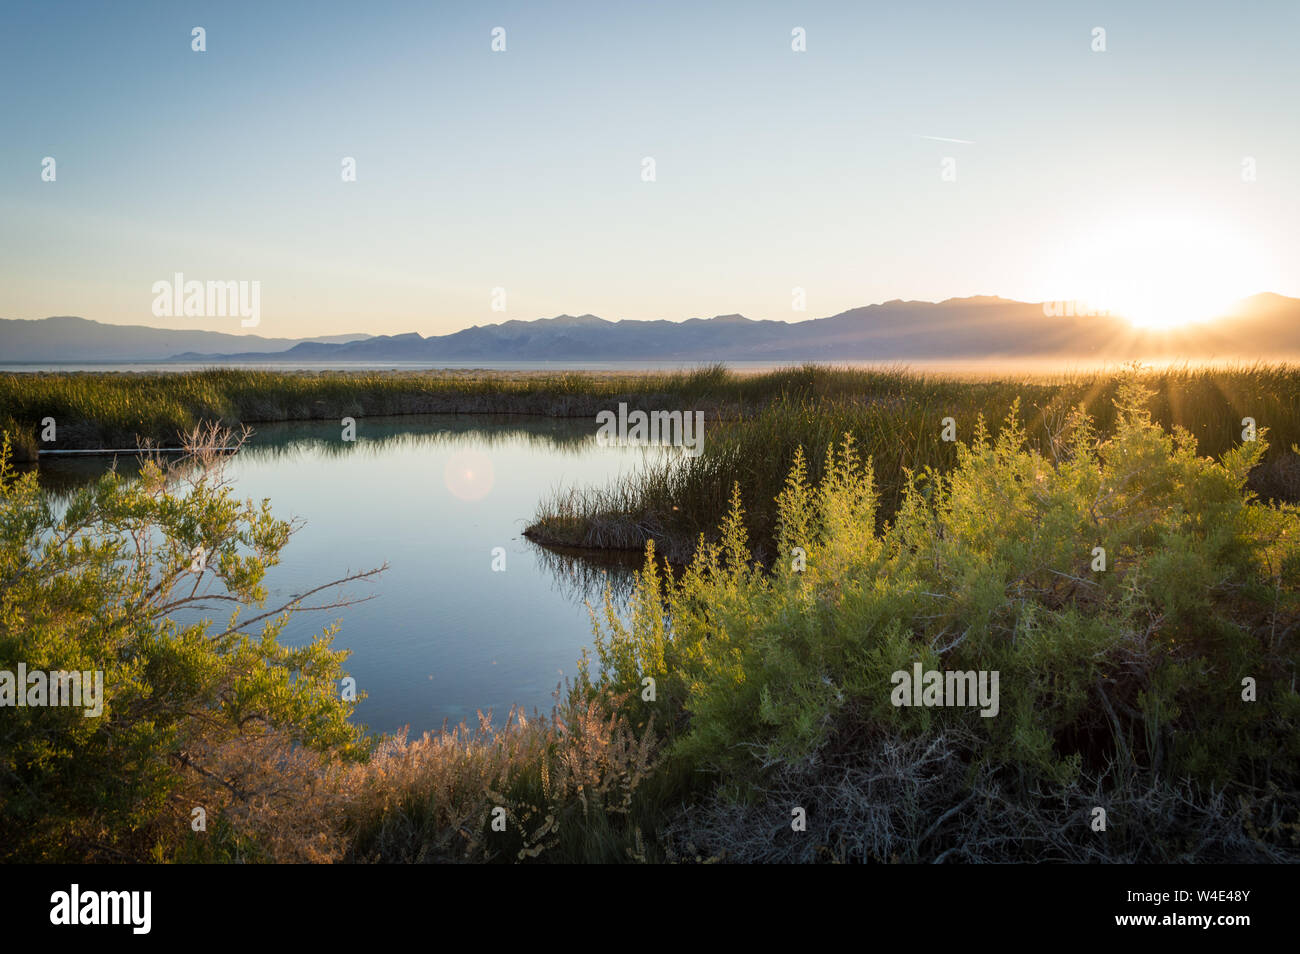 A view of the Black Rock Hot Spring near Gerlach, Nevada during a dramatic sunset with mist and mountains in the distance. Stock Photo